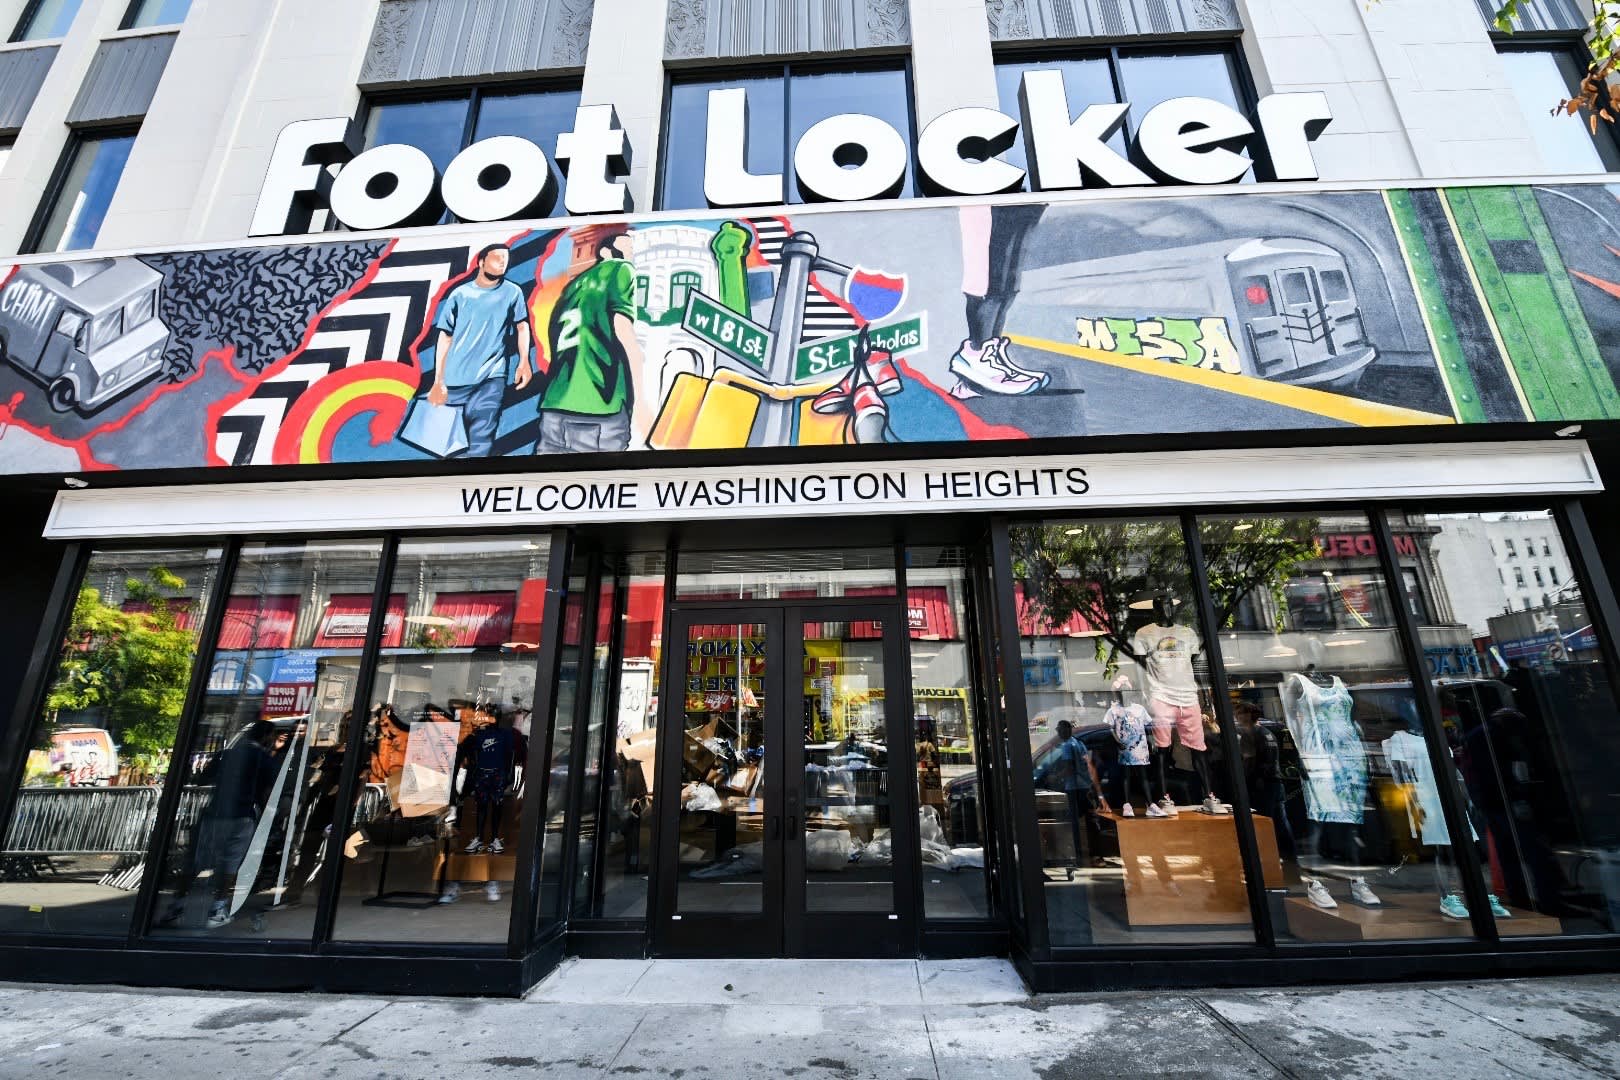 Foot Locker is opening massive 'Power' stores across the US, with Nike